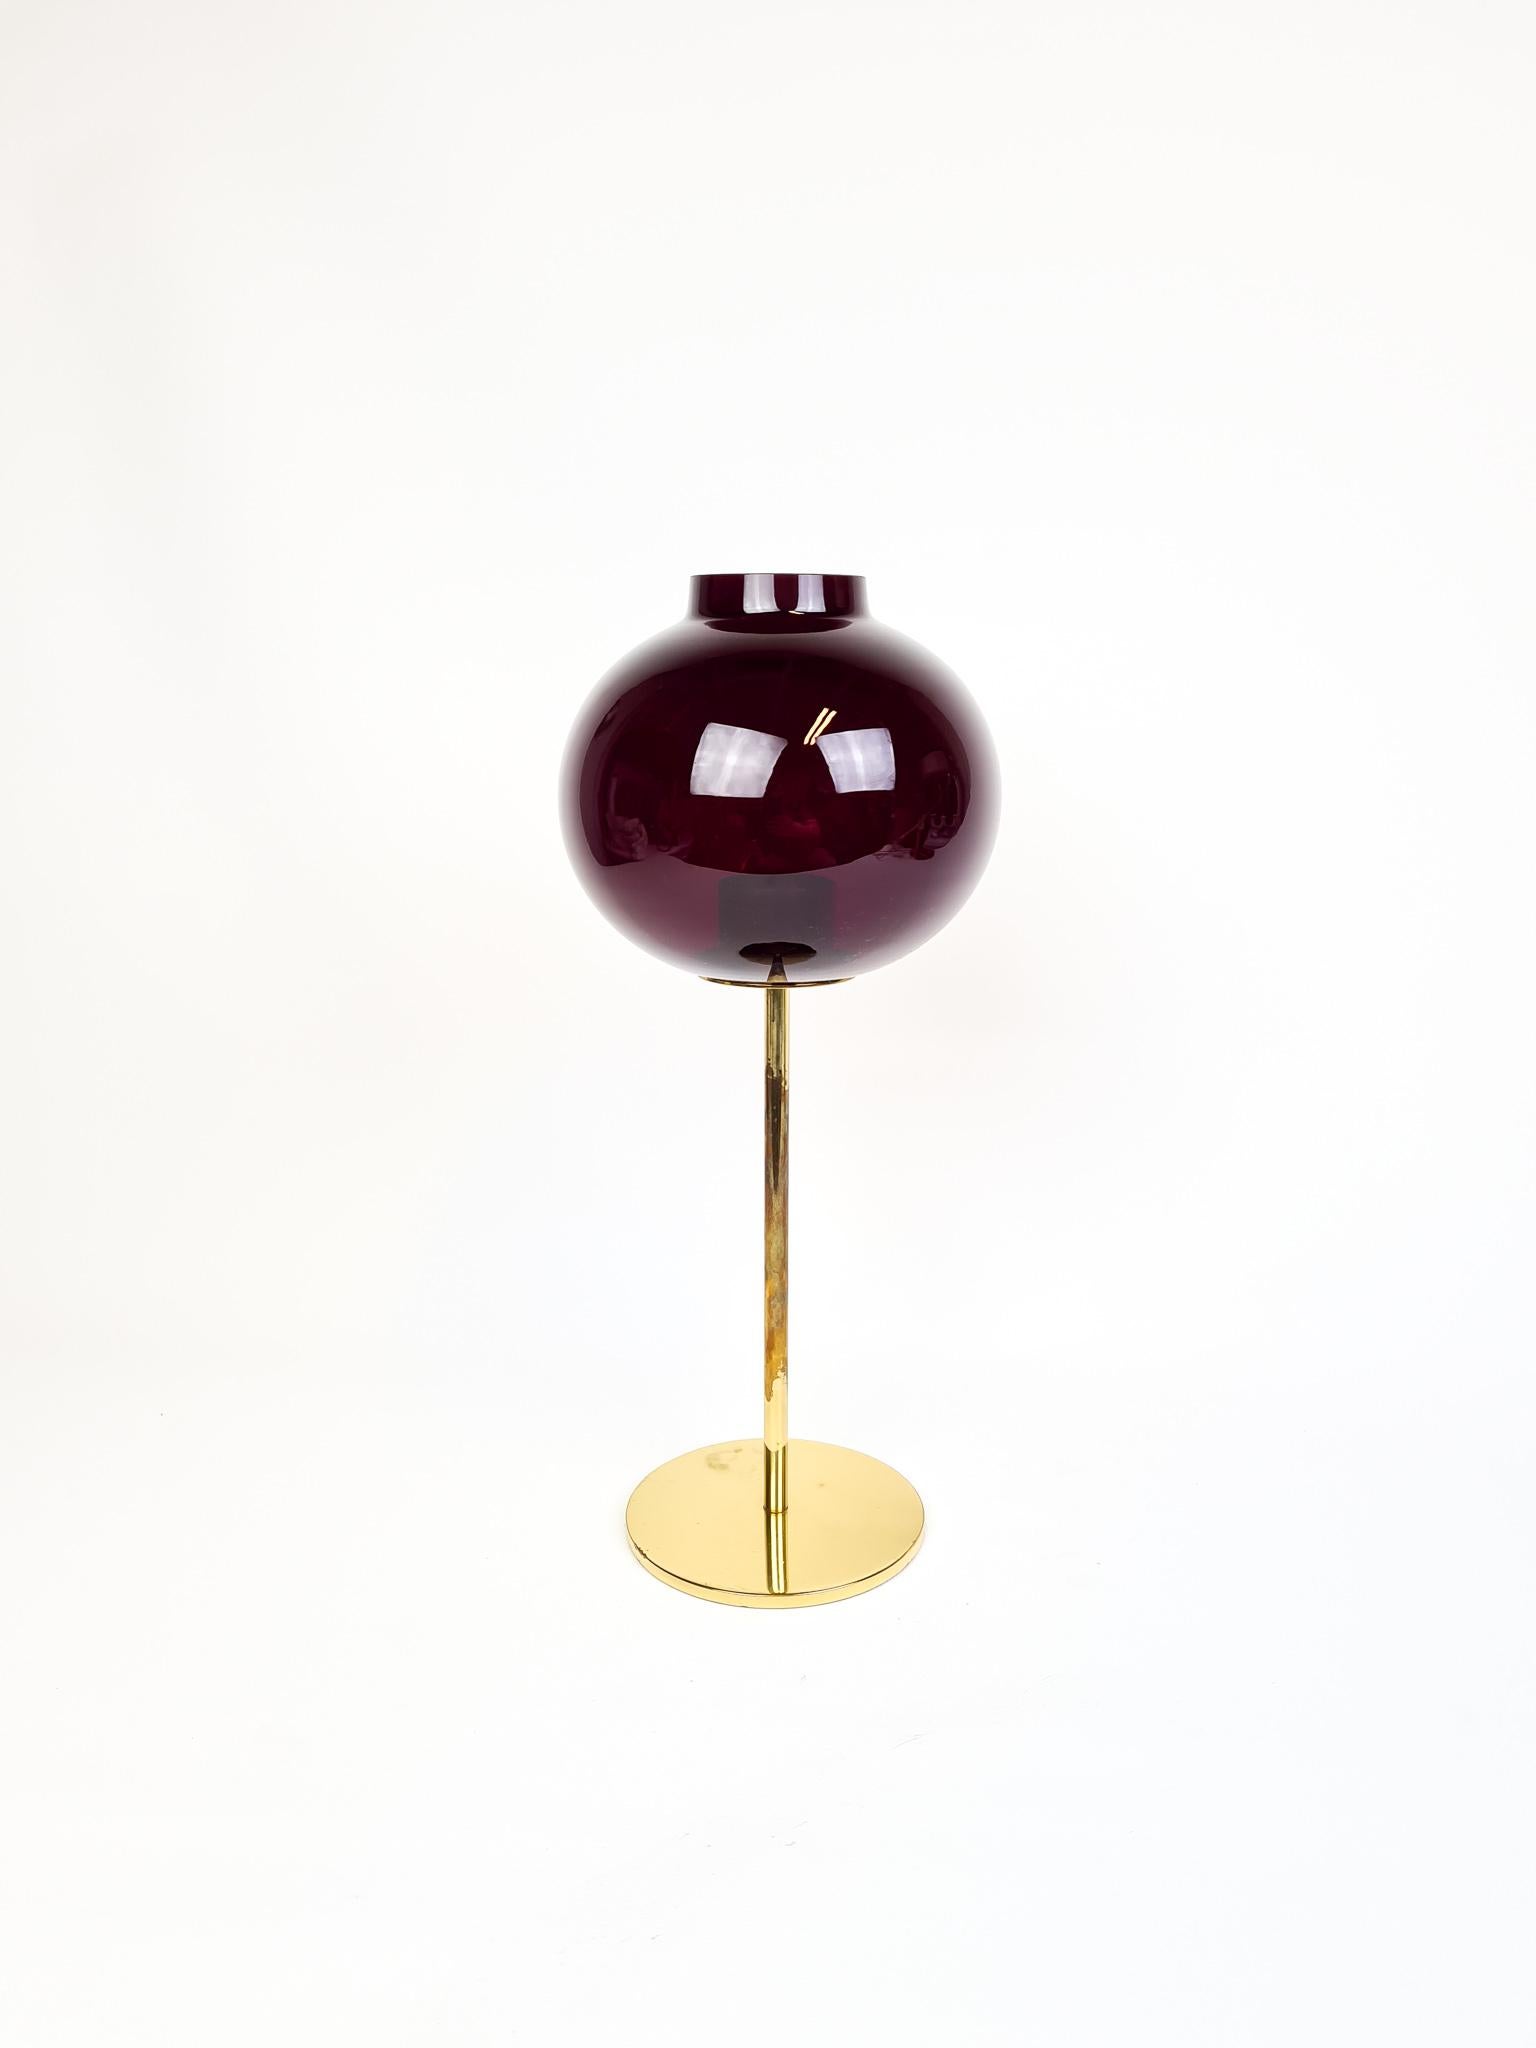 This candleholder was made in Sweden, 1960s and designed by Hans-Agne Jakobsson. It’s in brass and the top is made of Redglass. 

It’s in good condition, the brass with some wear.

Measures H 33 cm, D 14 cm.
